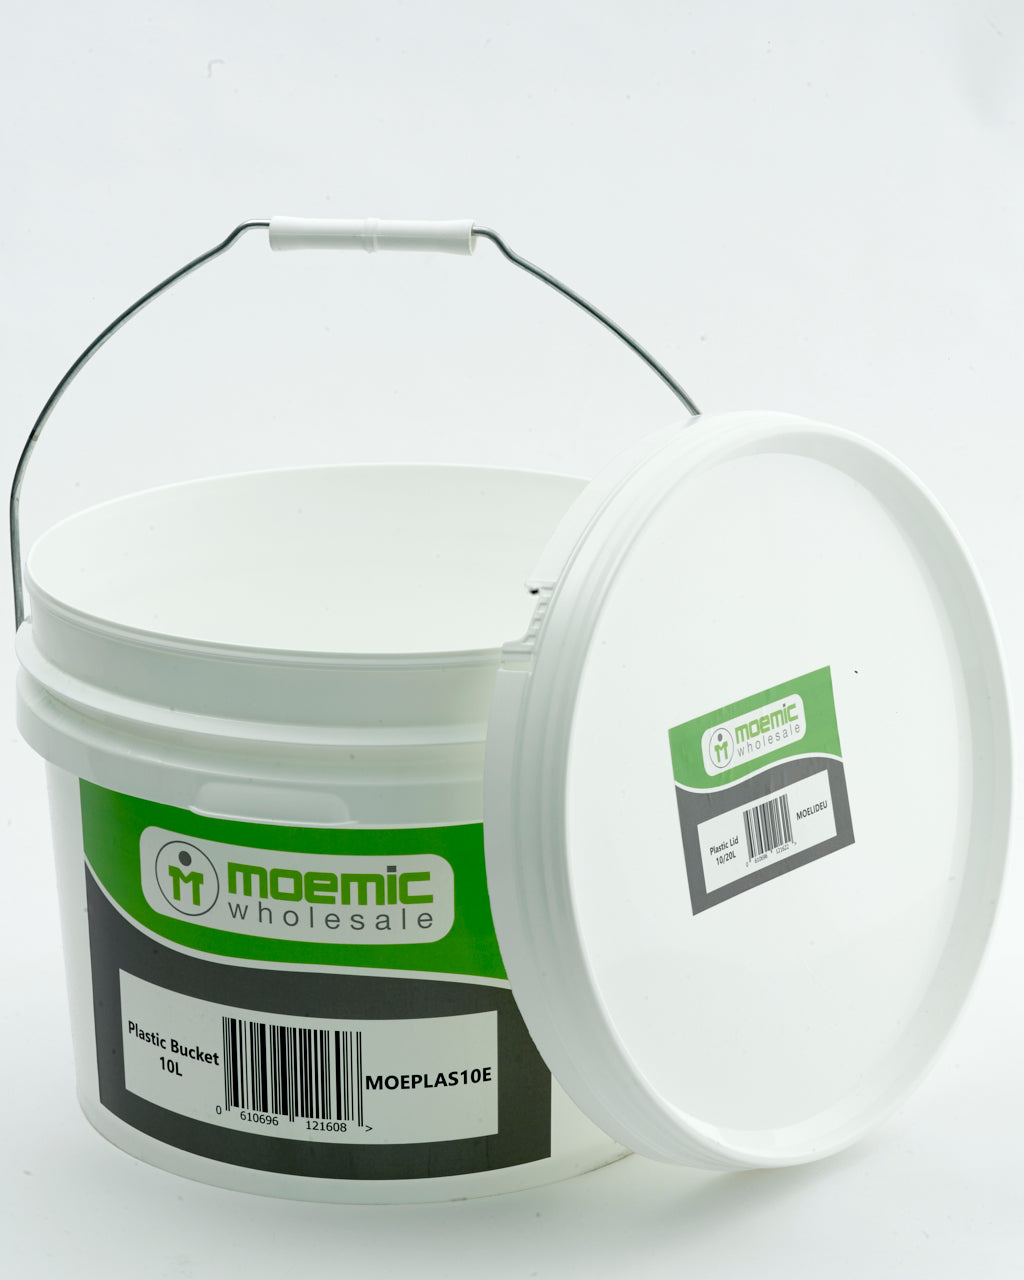 Moemic Plastic Pail Easylift - Tin Cans & Pails - Best Buy Trade Supplies Direct to Trade